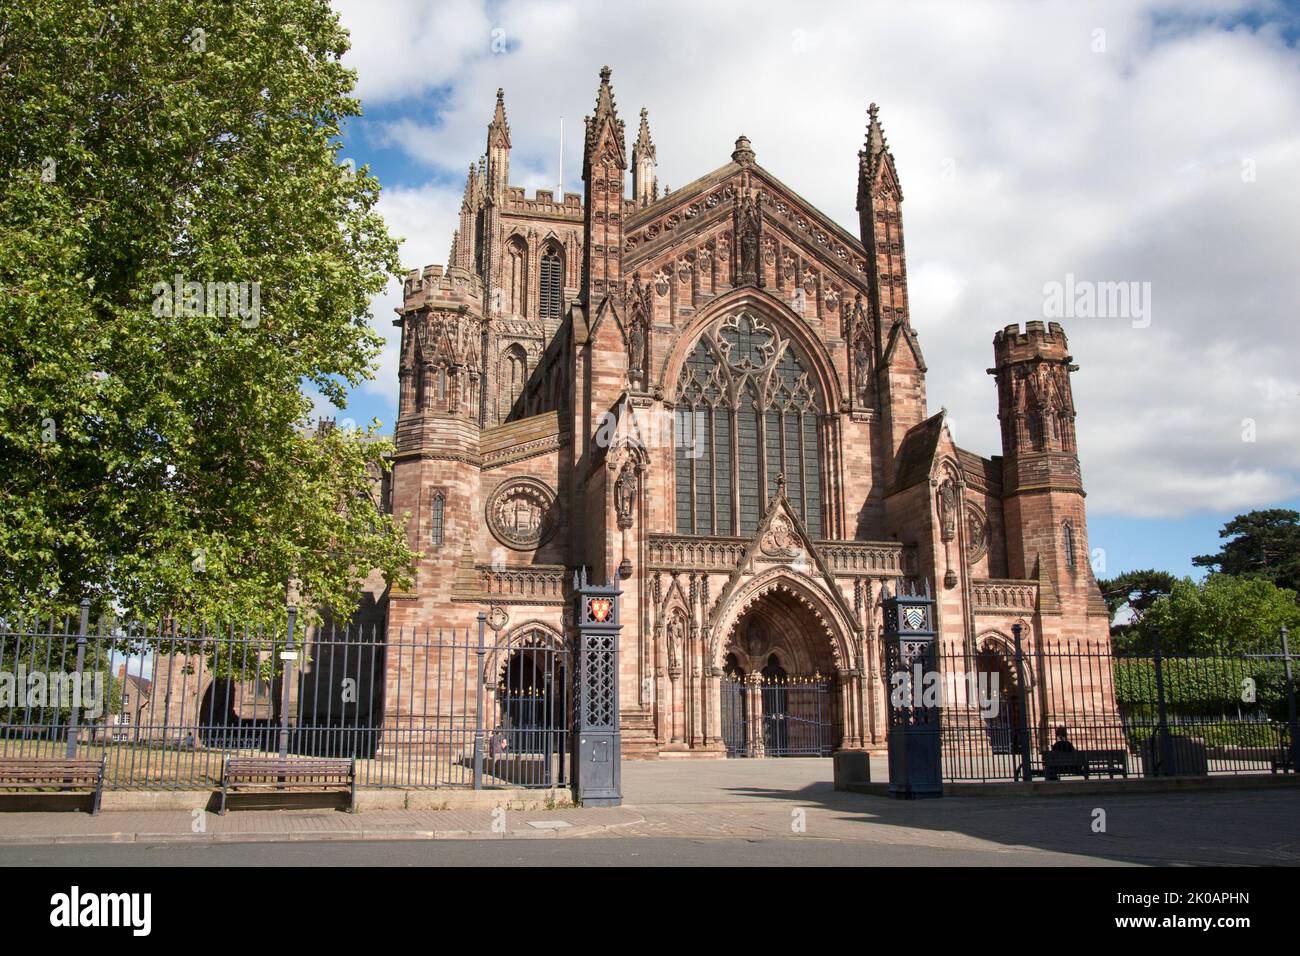 Hereford Cathedral, Herefordshire, England Stockfoto